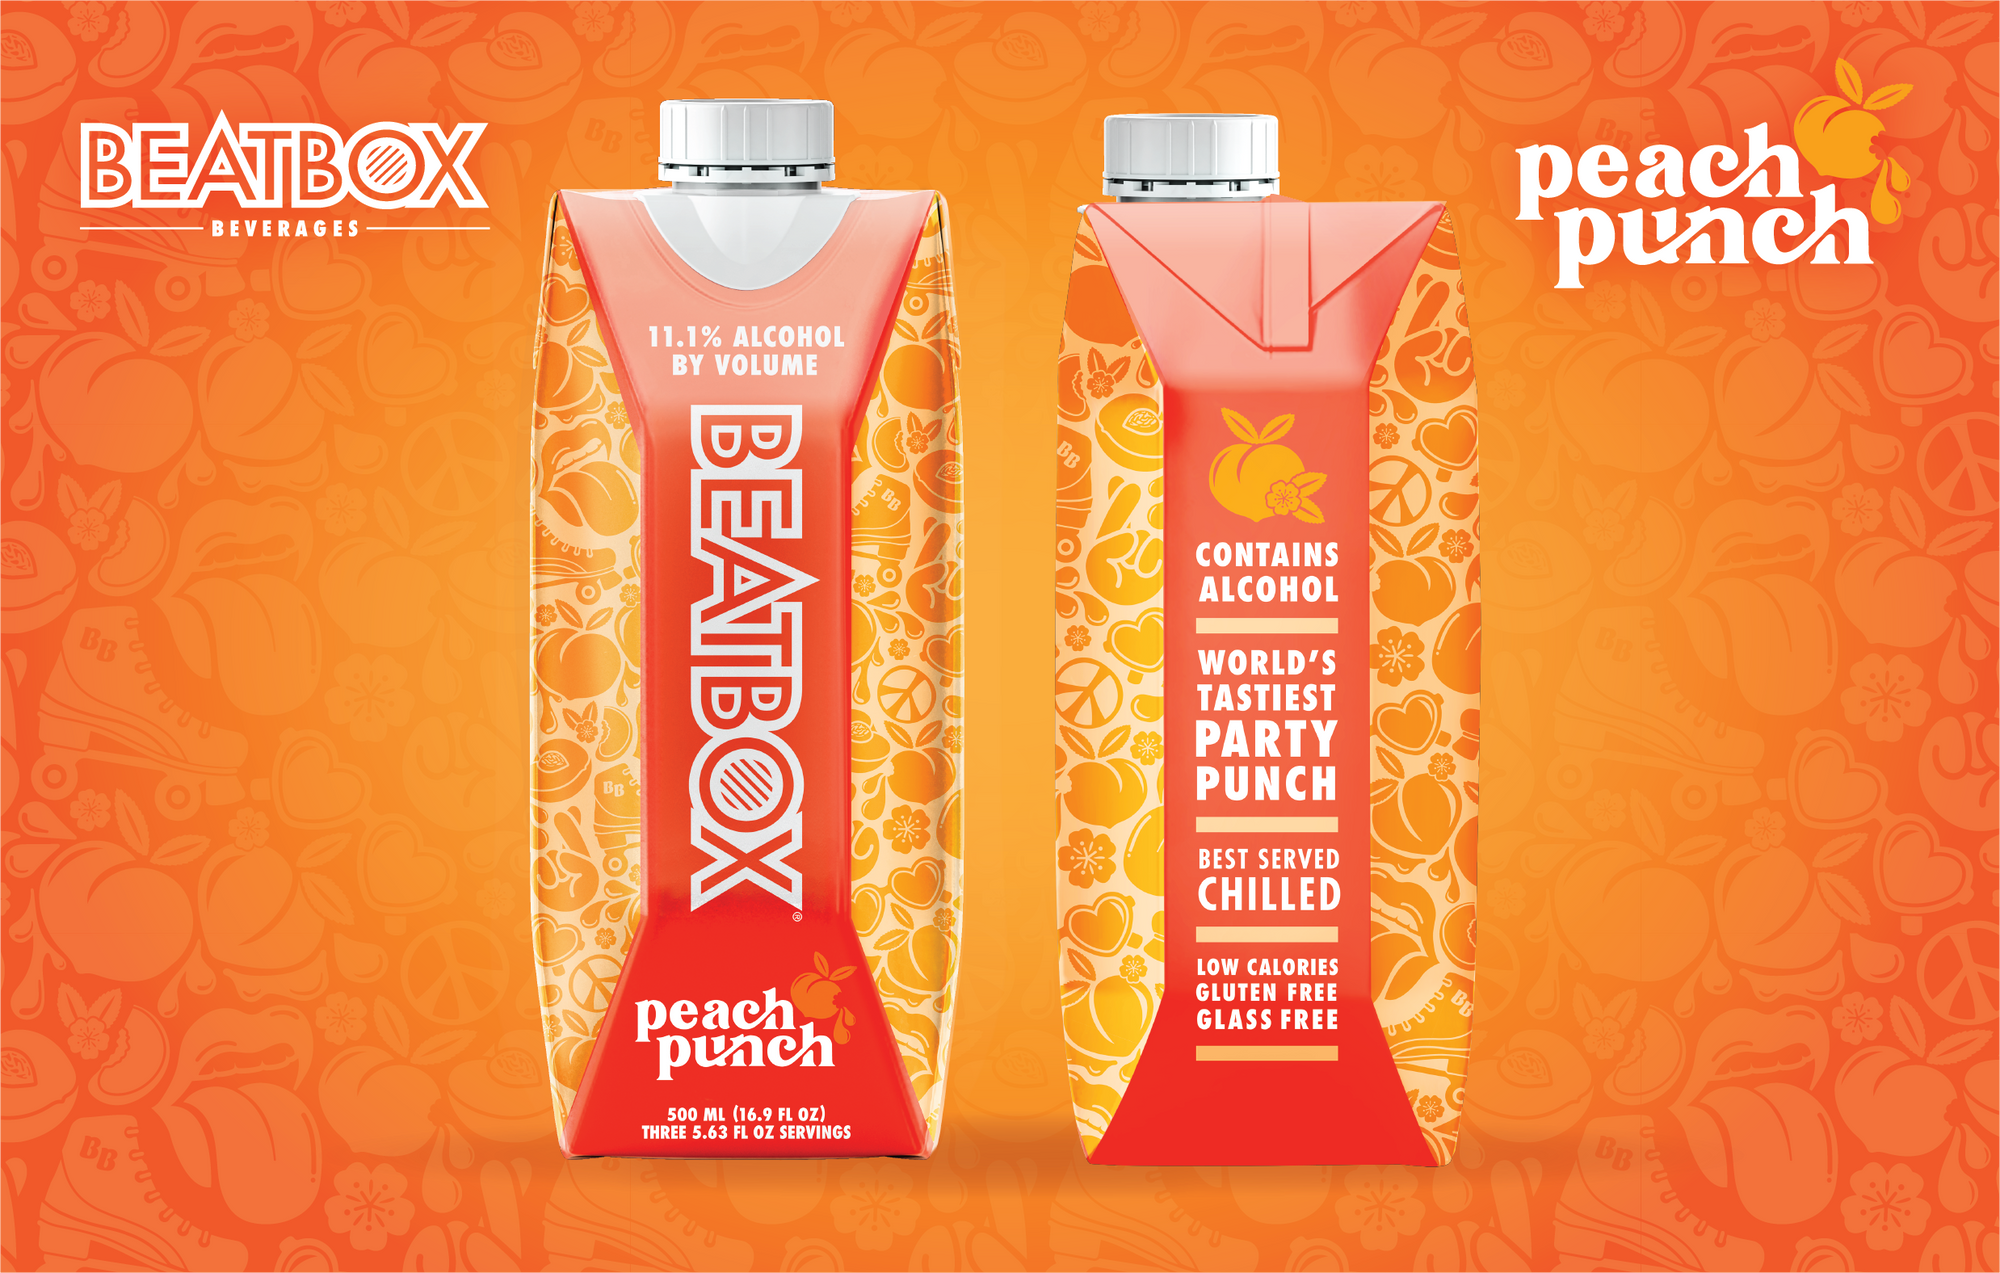 Worth The Squeeze: BeatBox Beverages Adds Peach Punch To Lineup